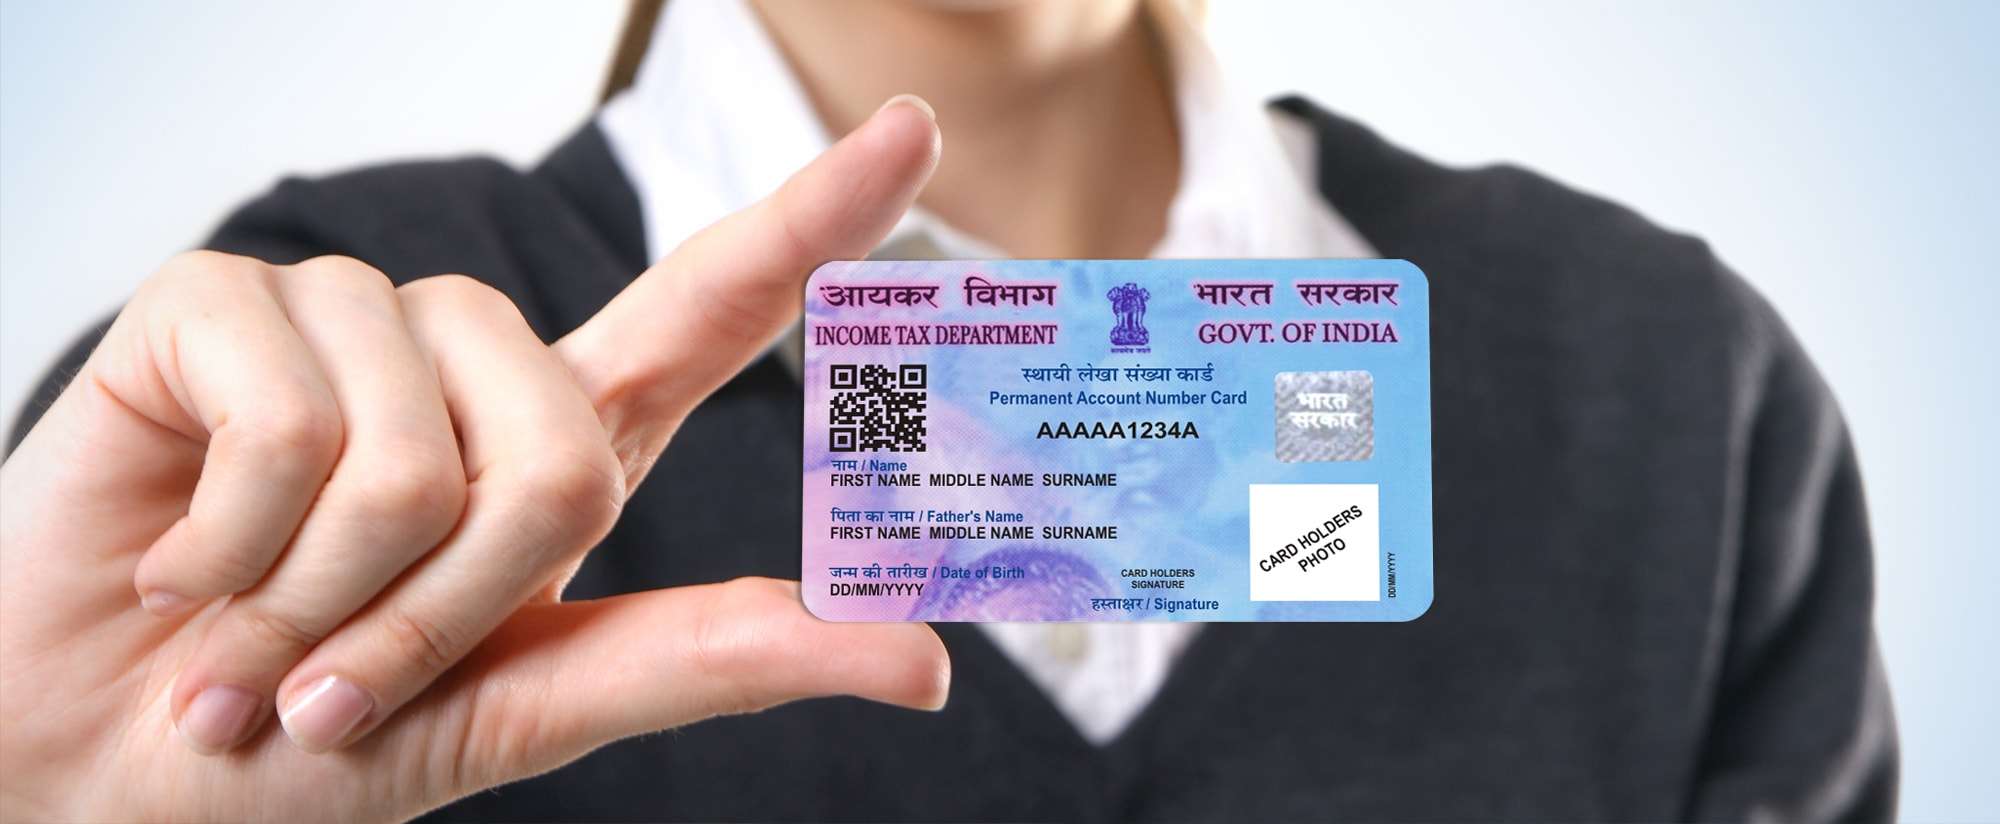 Now PAN card will be made in just 10 minutes from home, follow these easy procedures 1